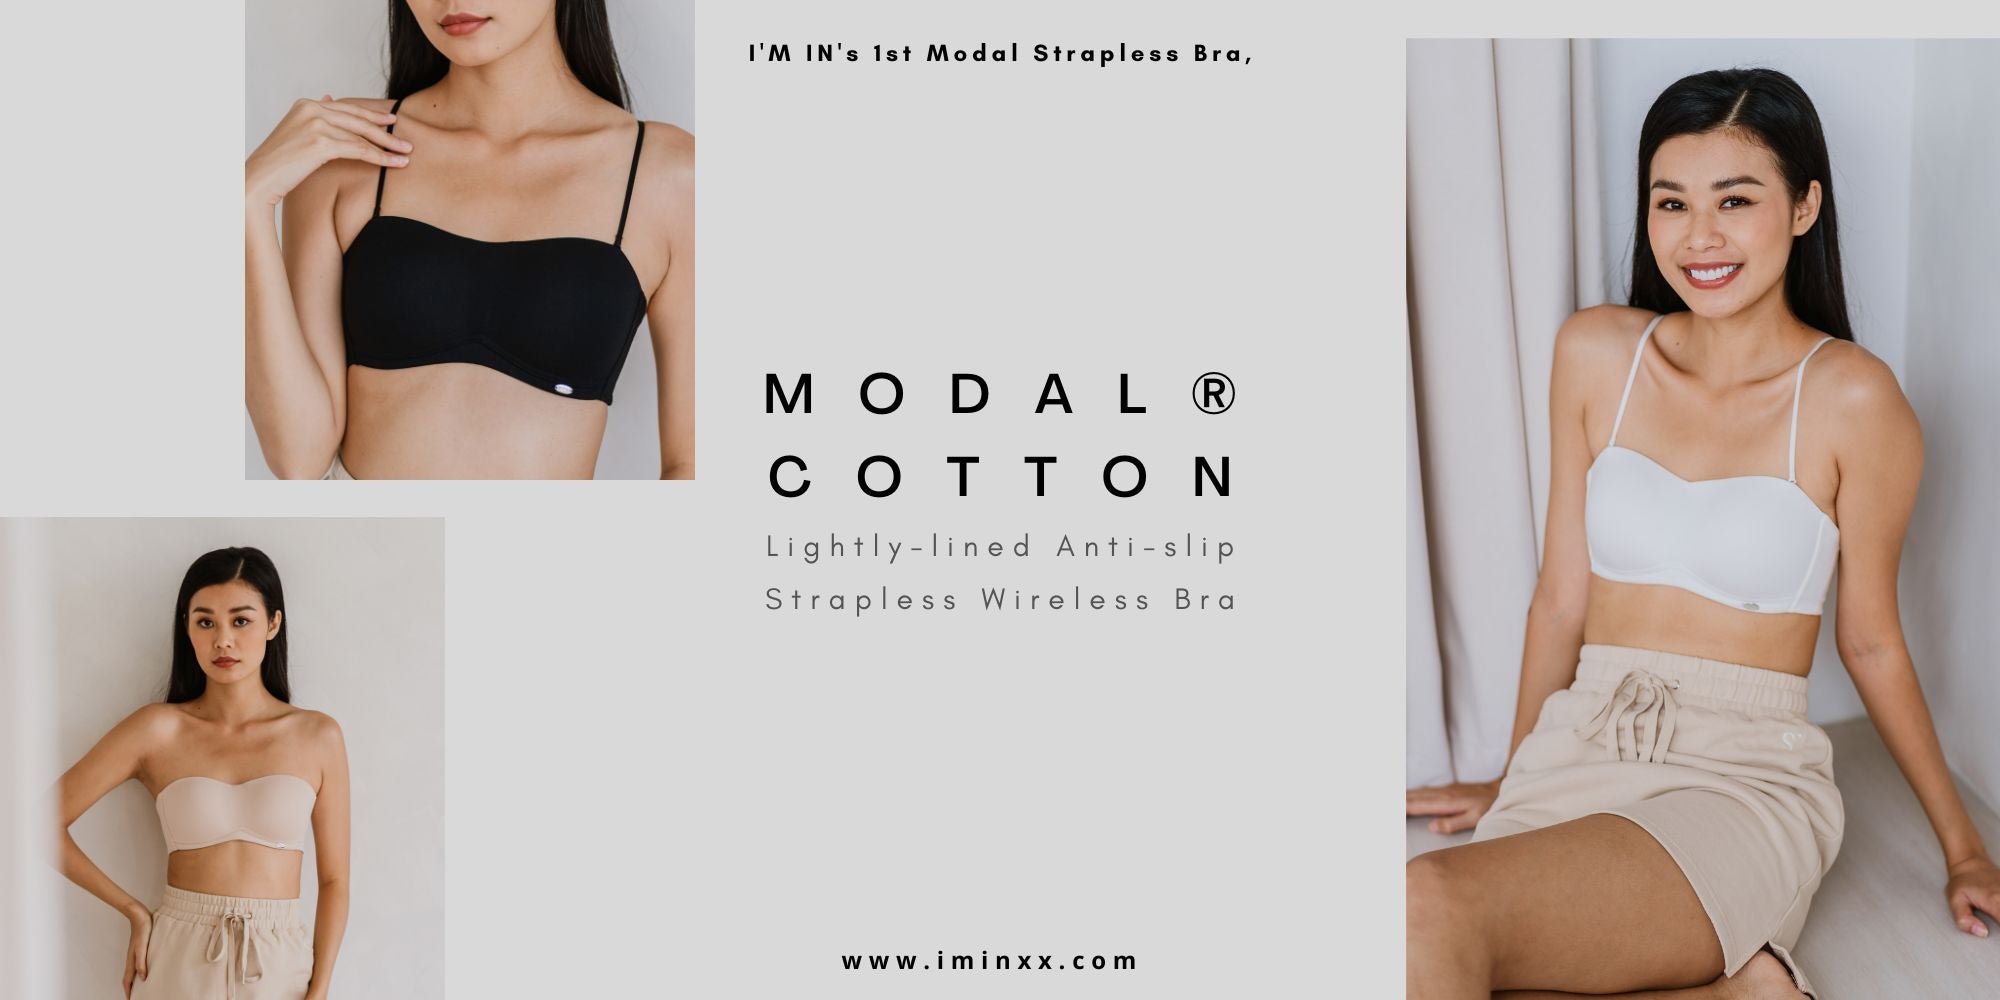 Strapless wireless bra • Compare & see prices now »